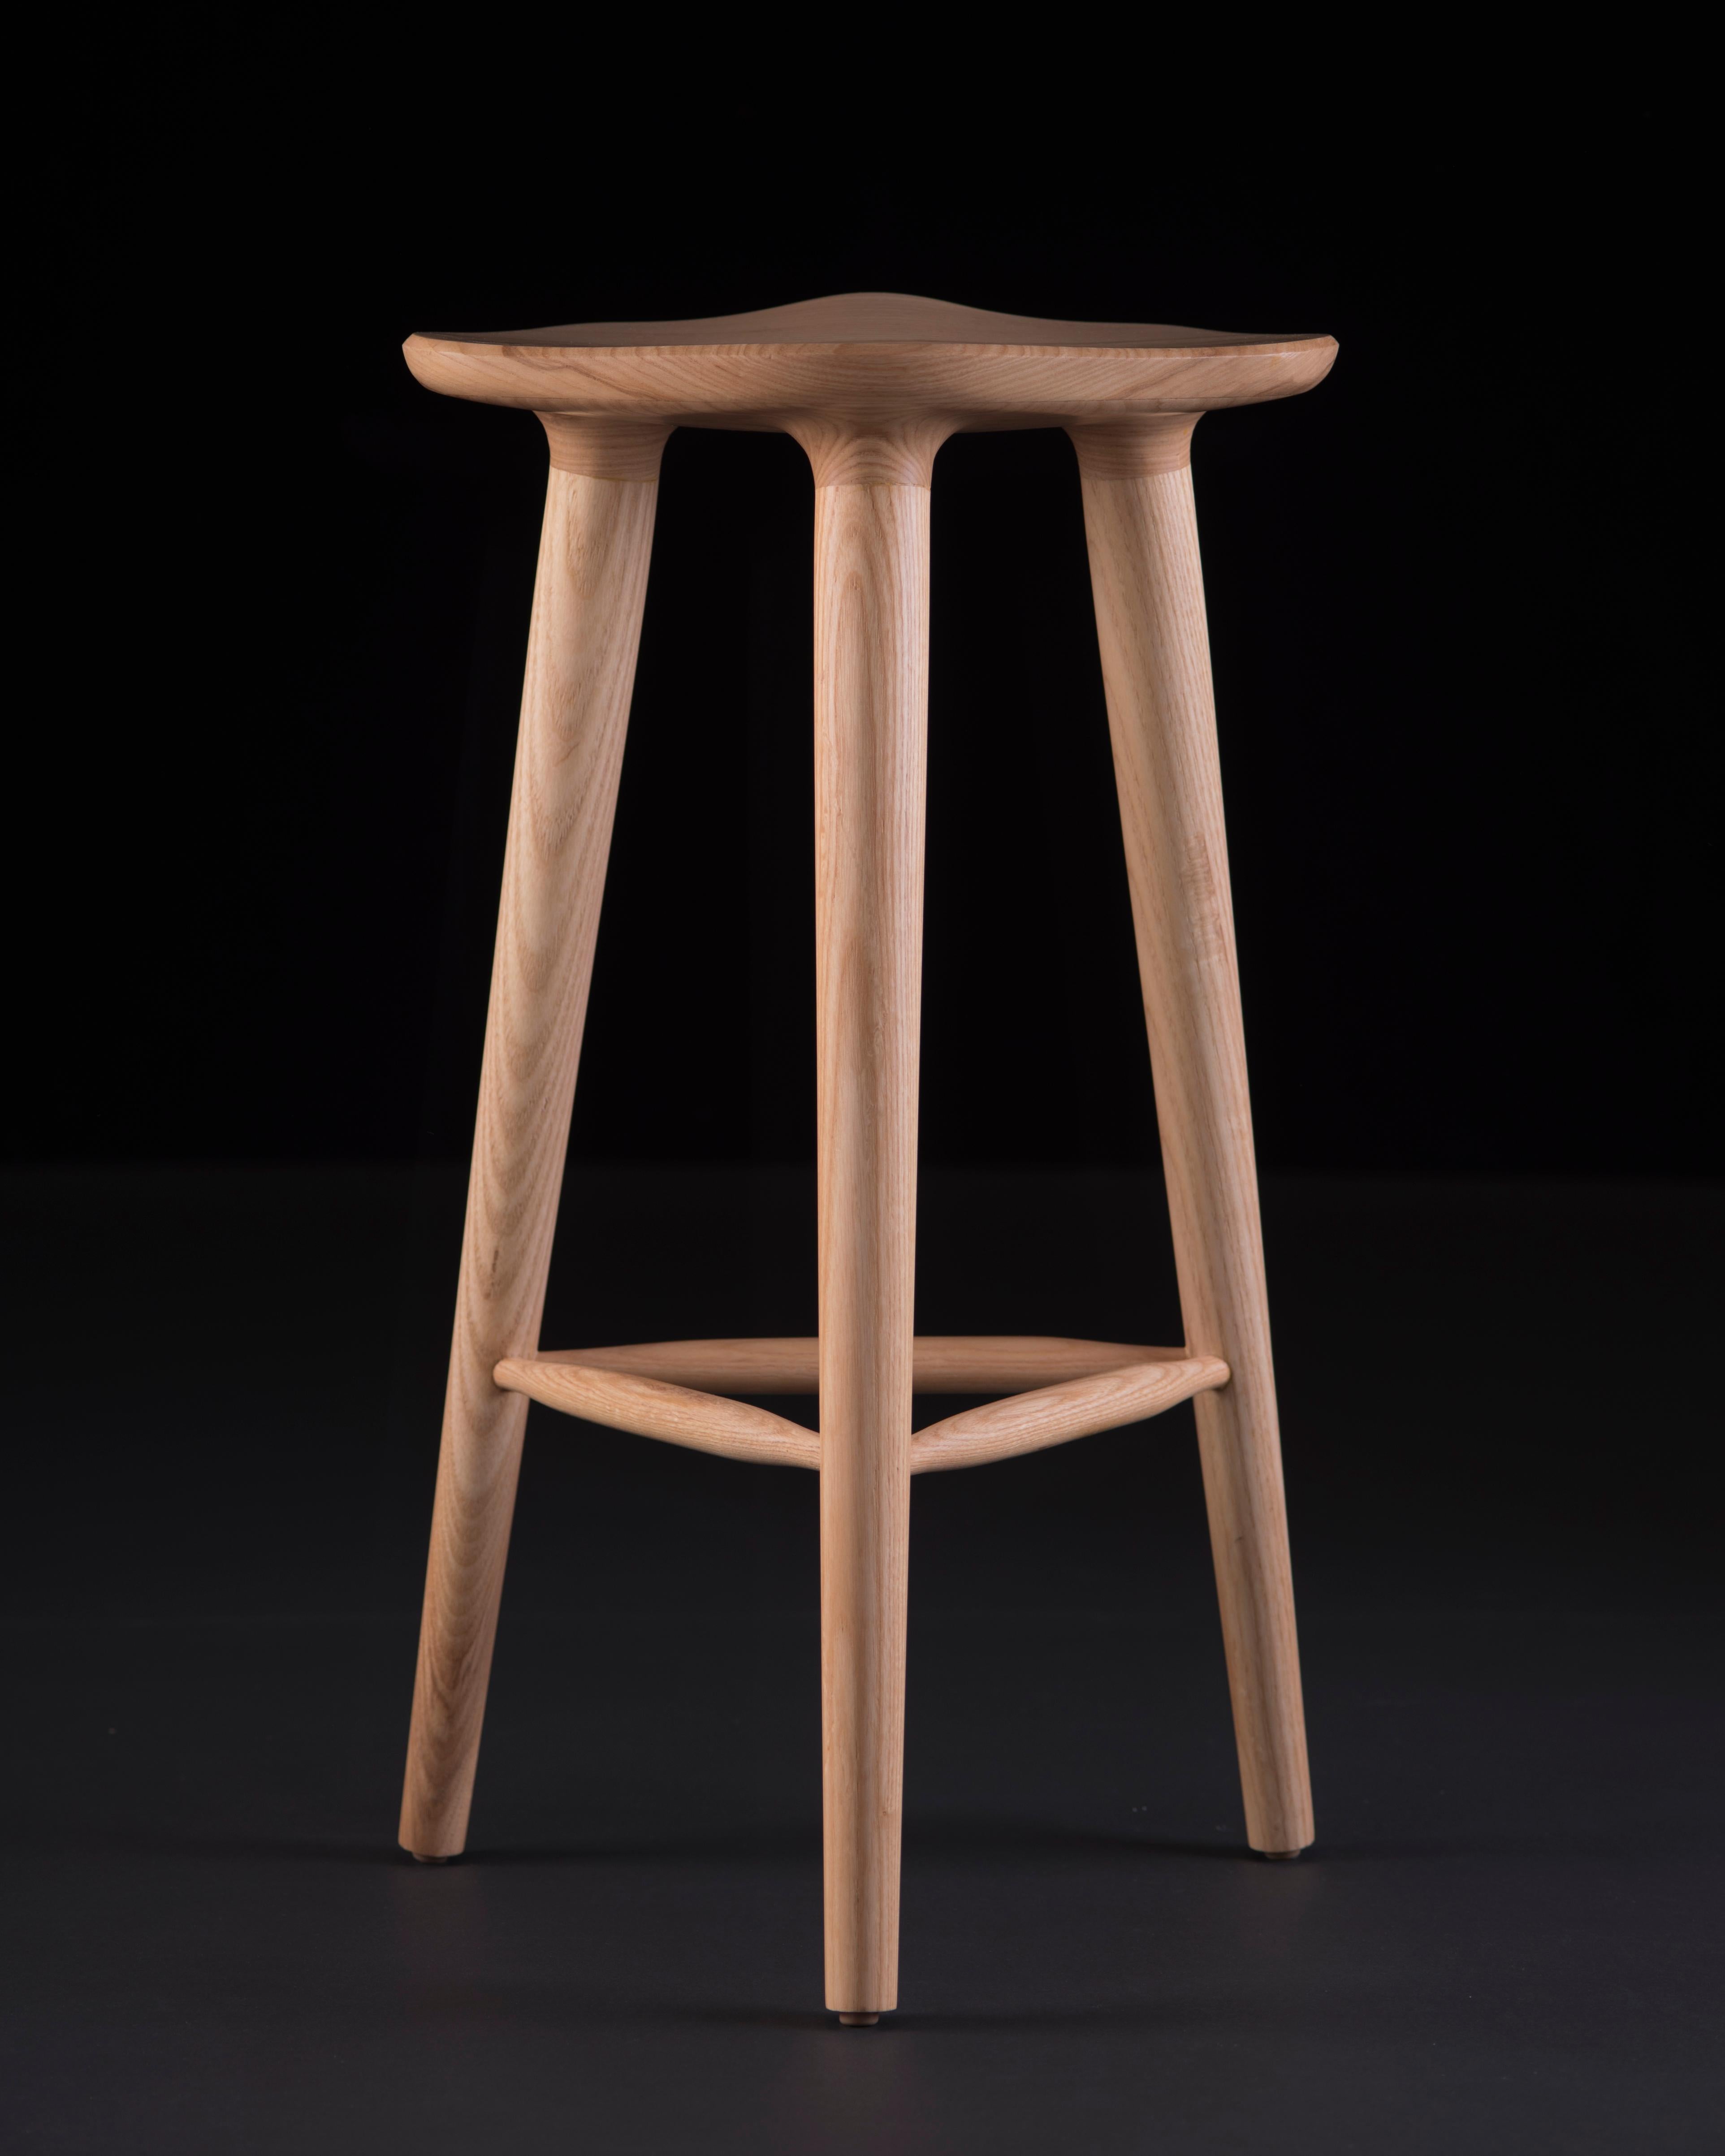 Descendants of an extraordinary family, TAM stools are grown to 65 cm in height, multiplying in a garden of possibilities while preserving in their genetic makeup the beauty of ash wood. Its radiant design has become an icon in kitchens,